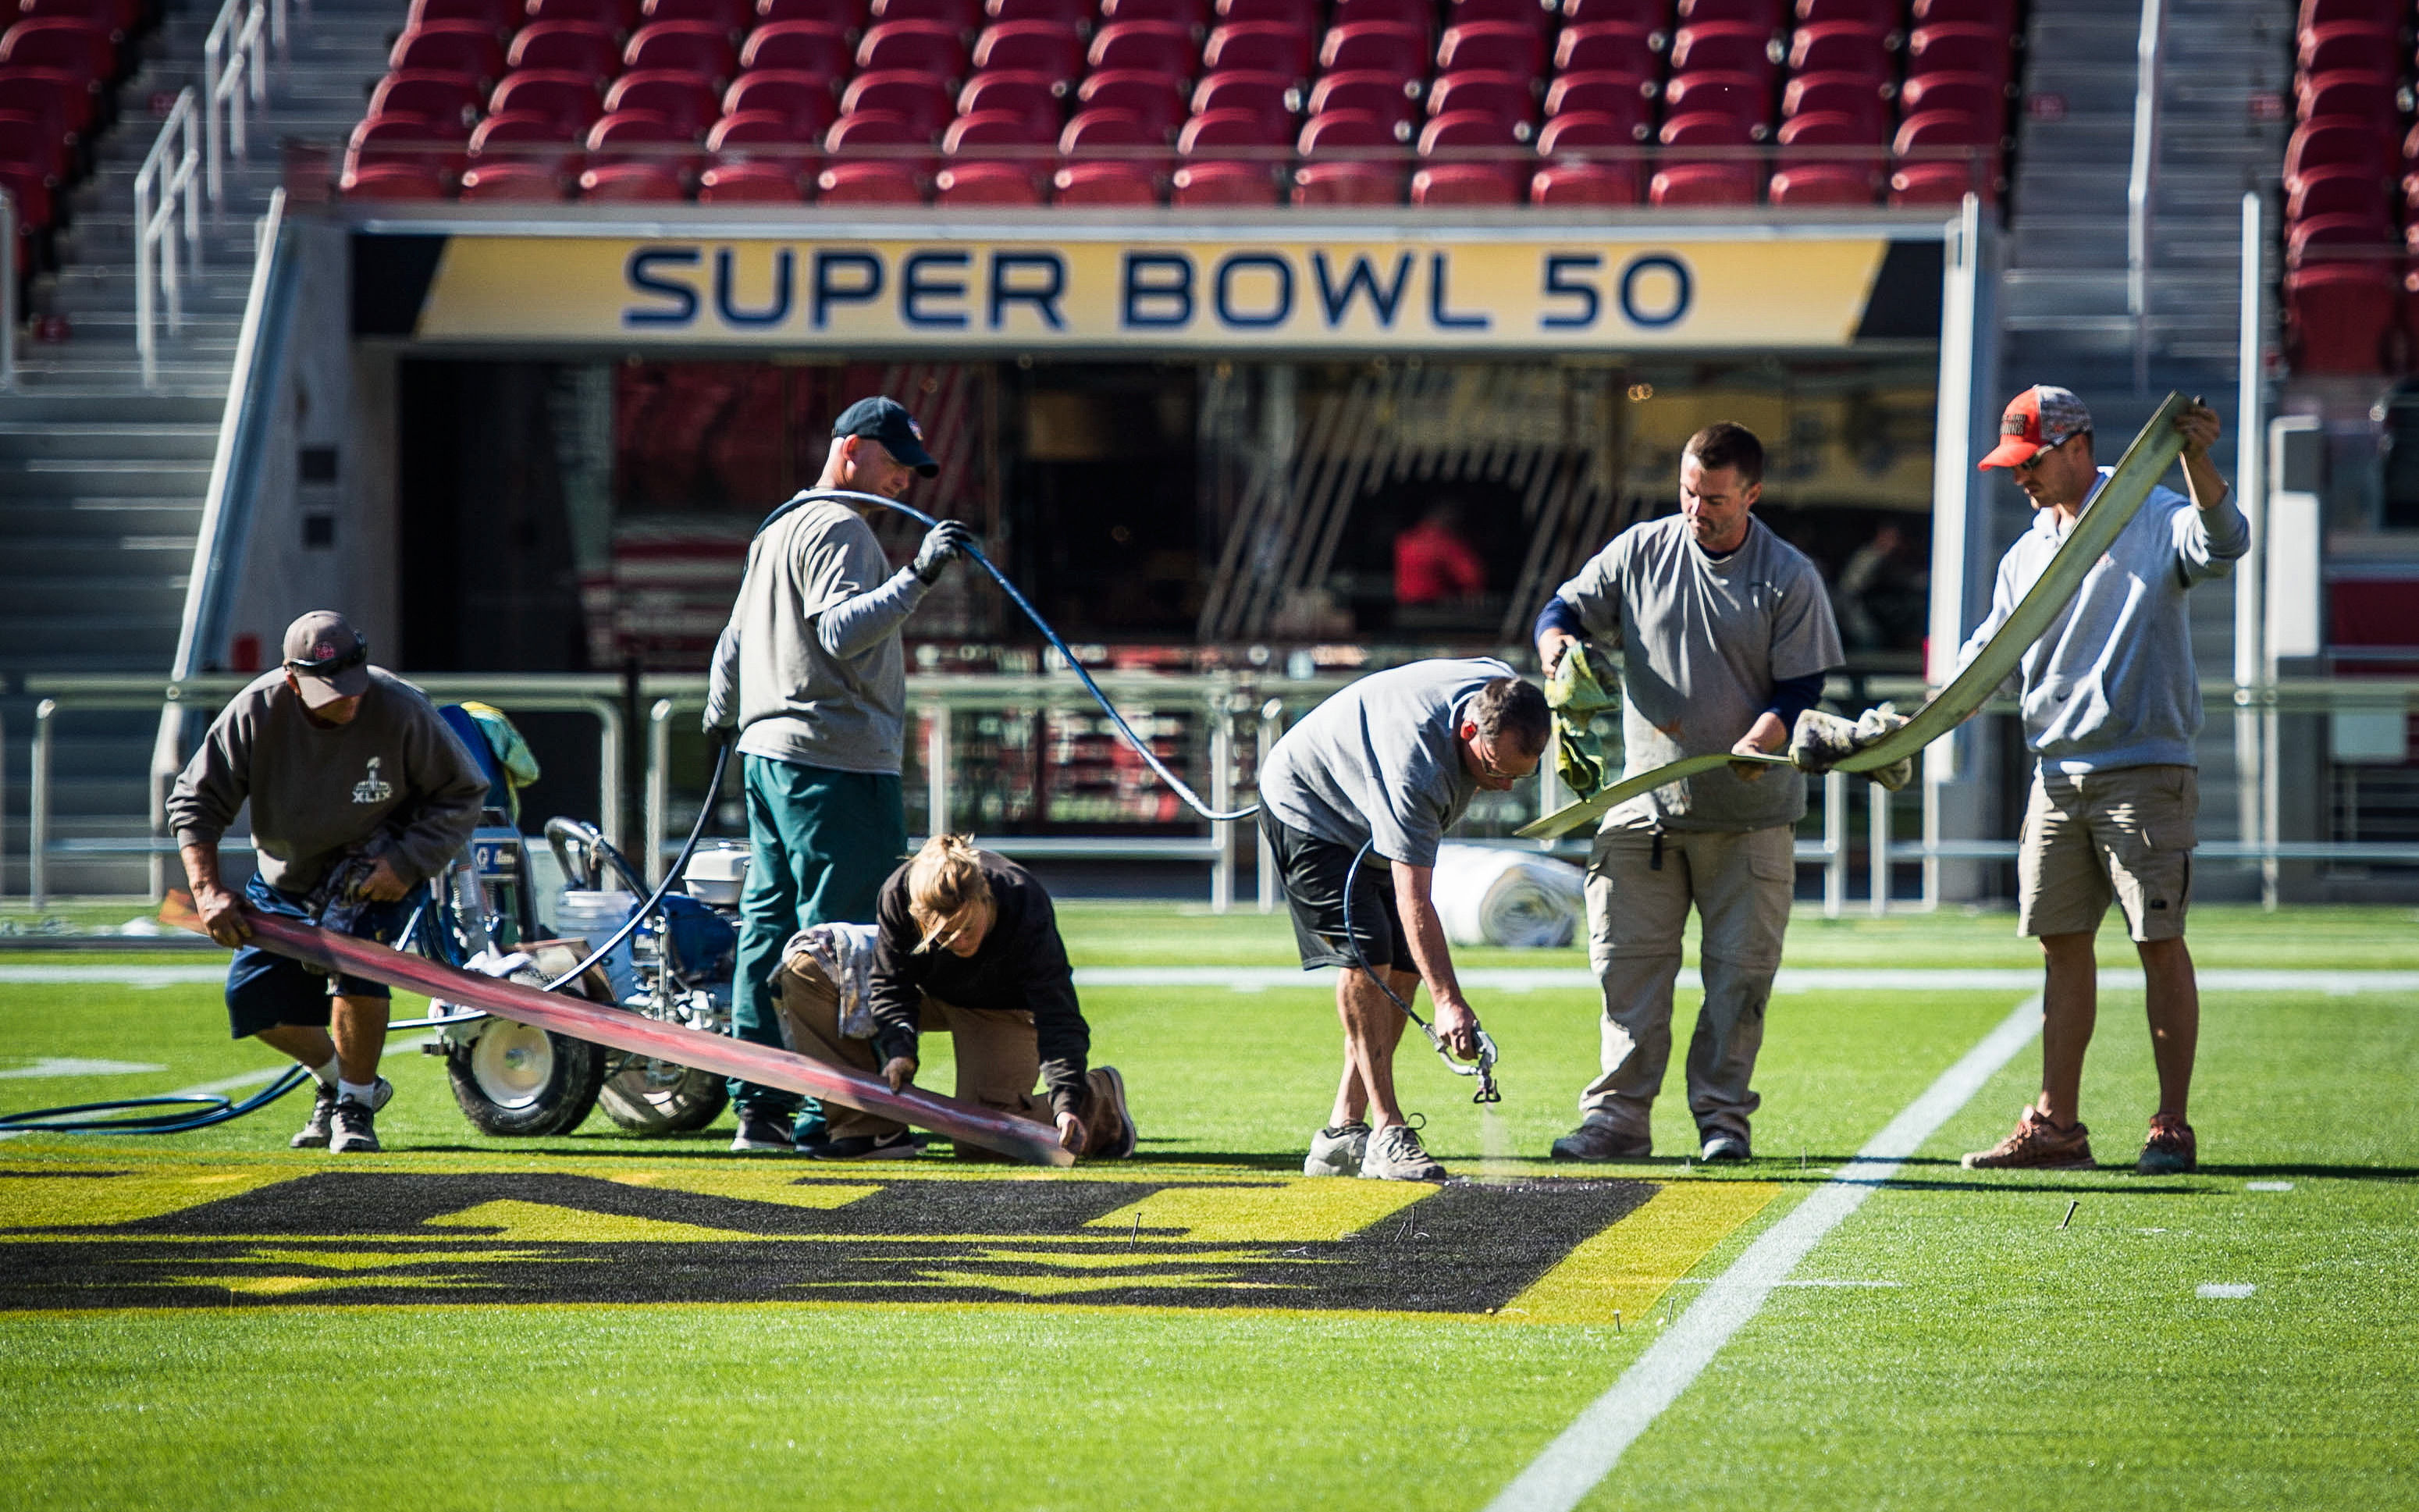 87-year-old groundskeeper George Toma had no issue with the Levi's Stadium turf. (USATSI)